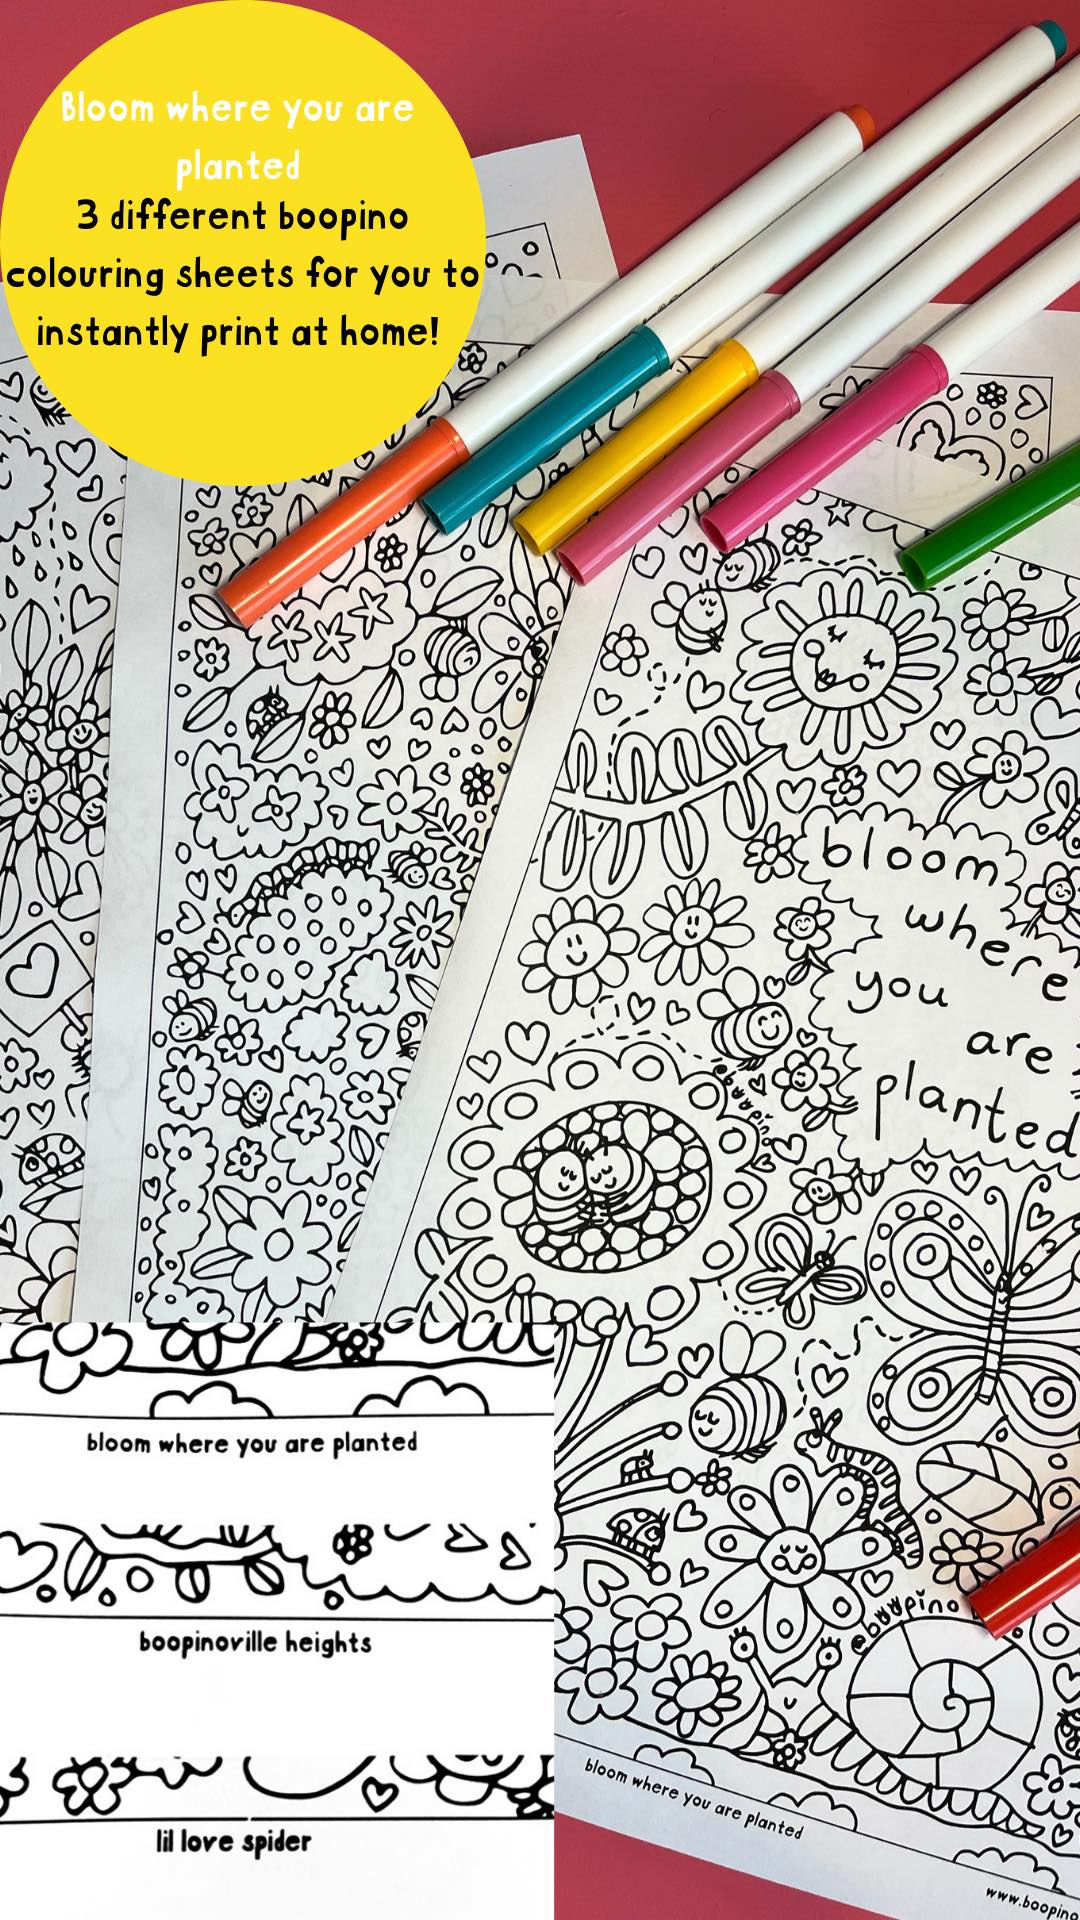 Instant colouring sheets